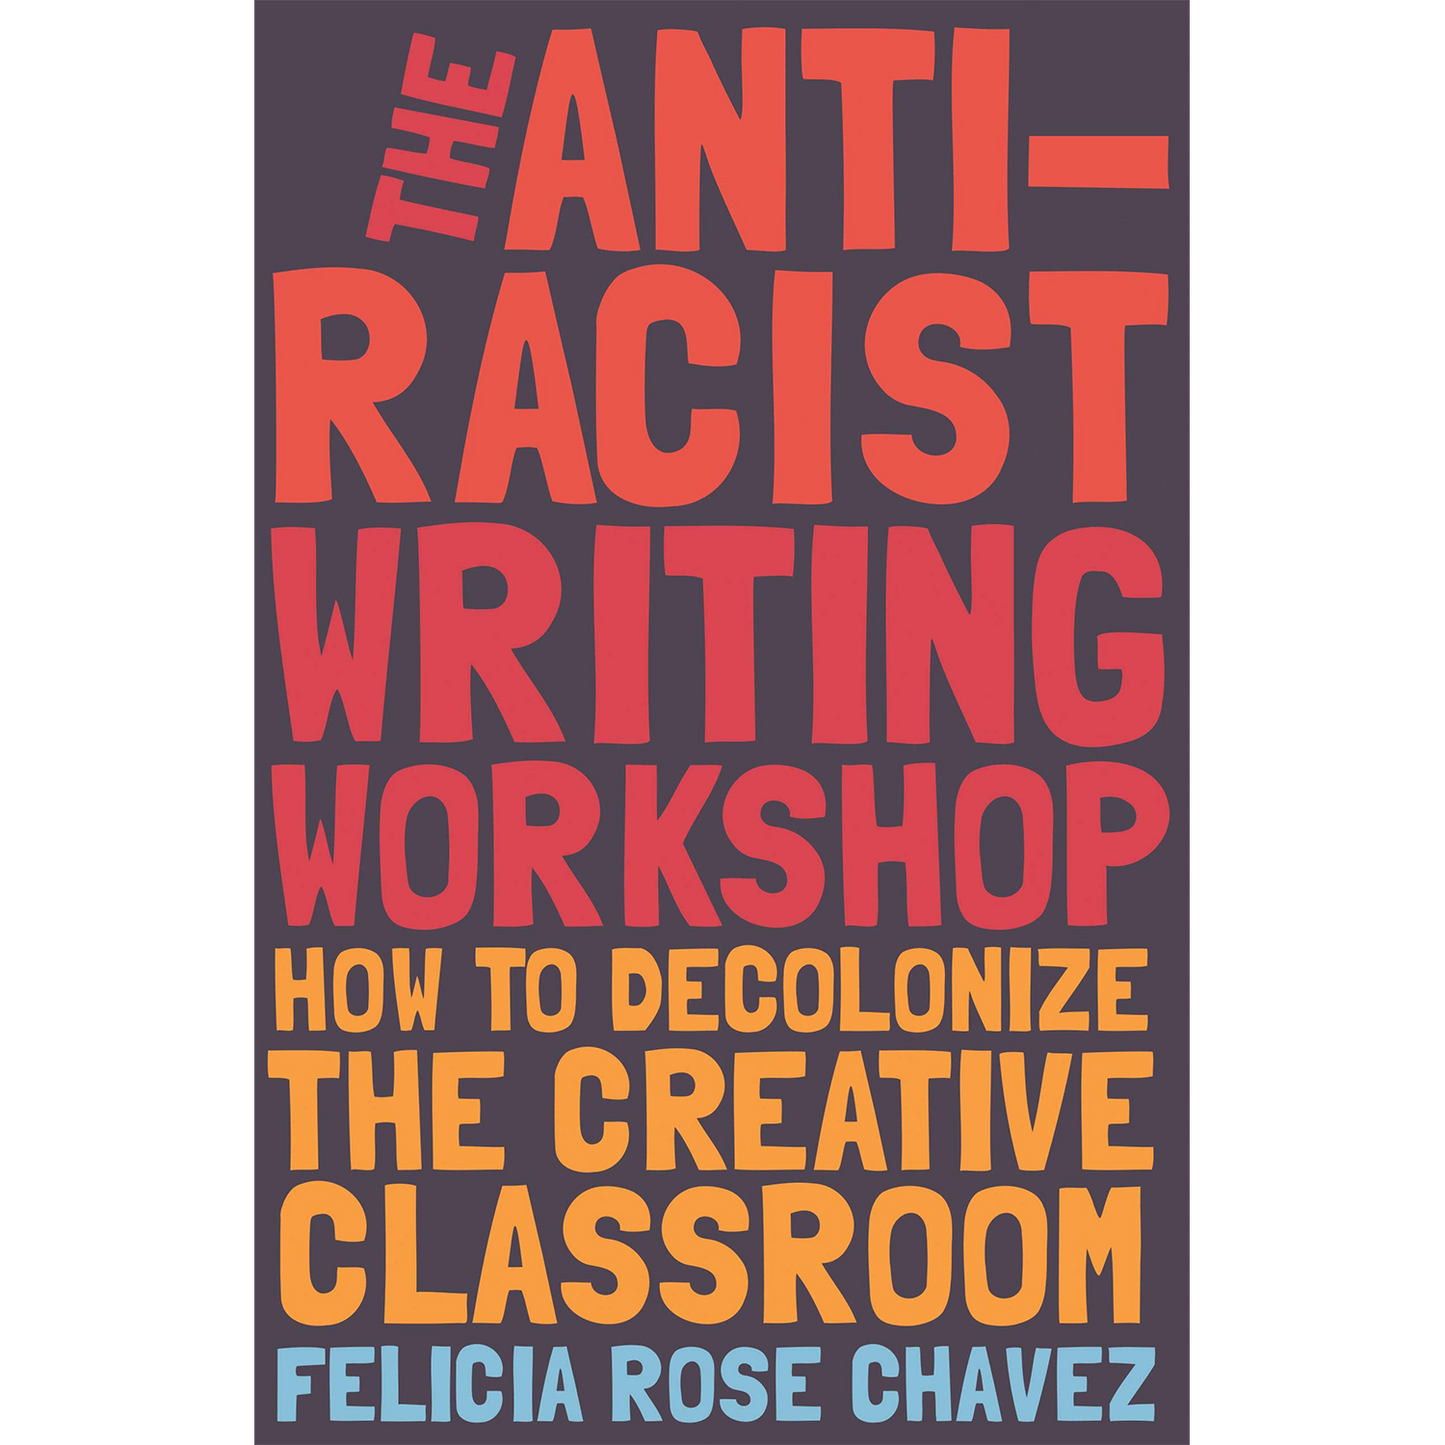 The Anti-Racist Writing Workshop: How To Decolonize the Creative Classroom (BreakBeat Poets) (Paperback)